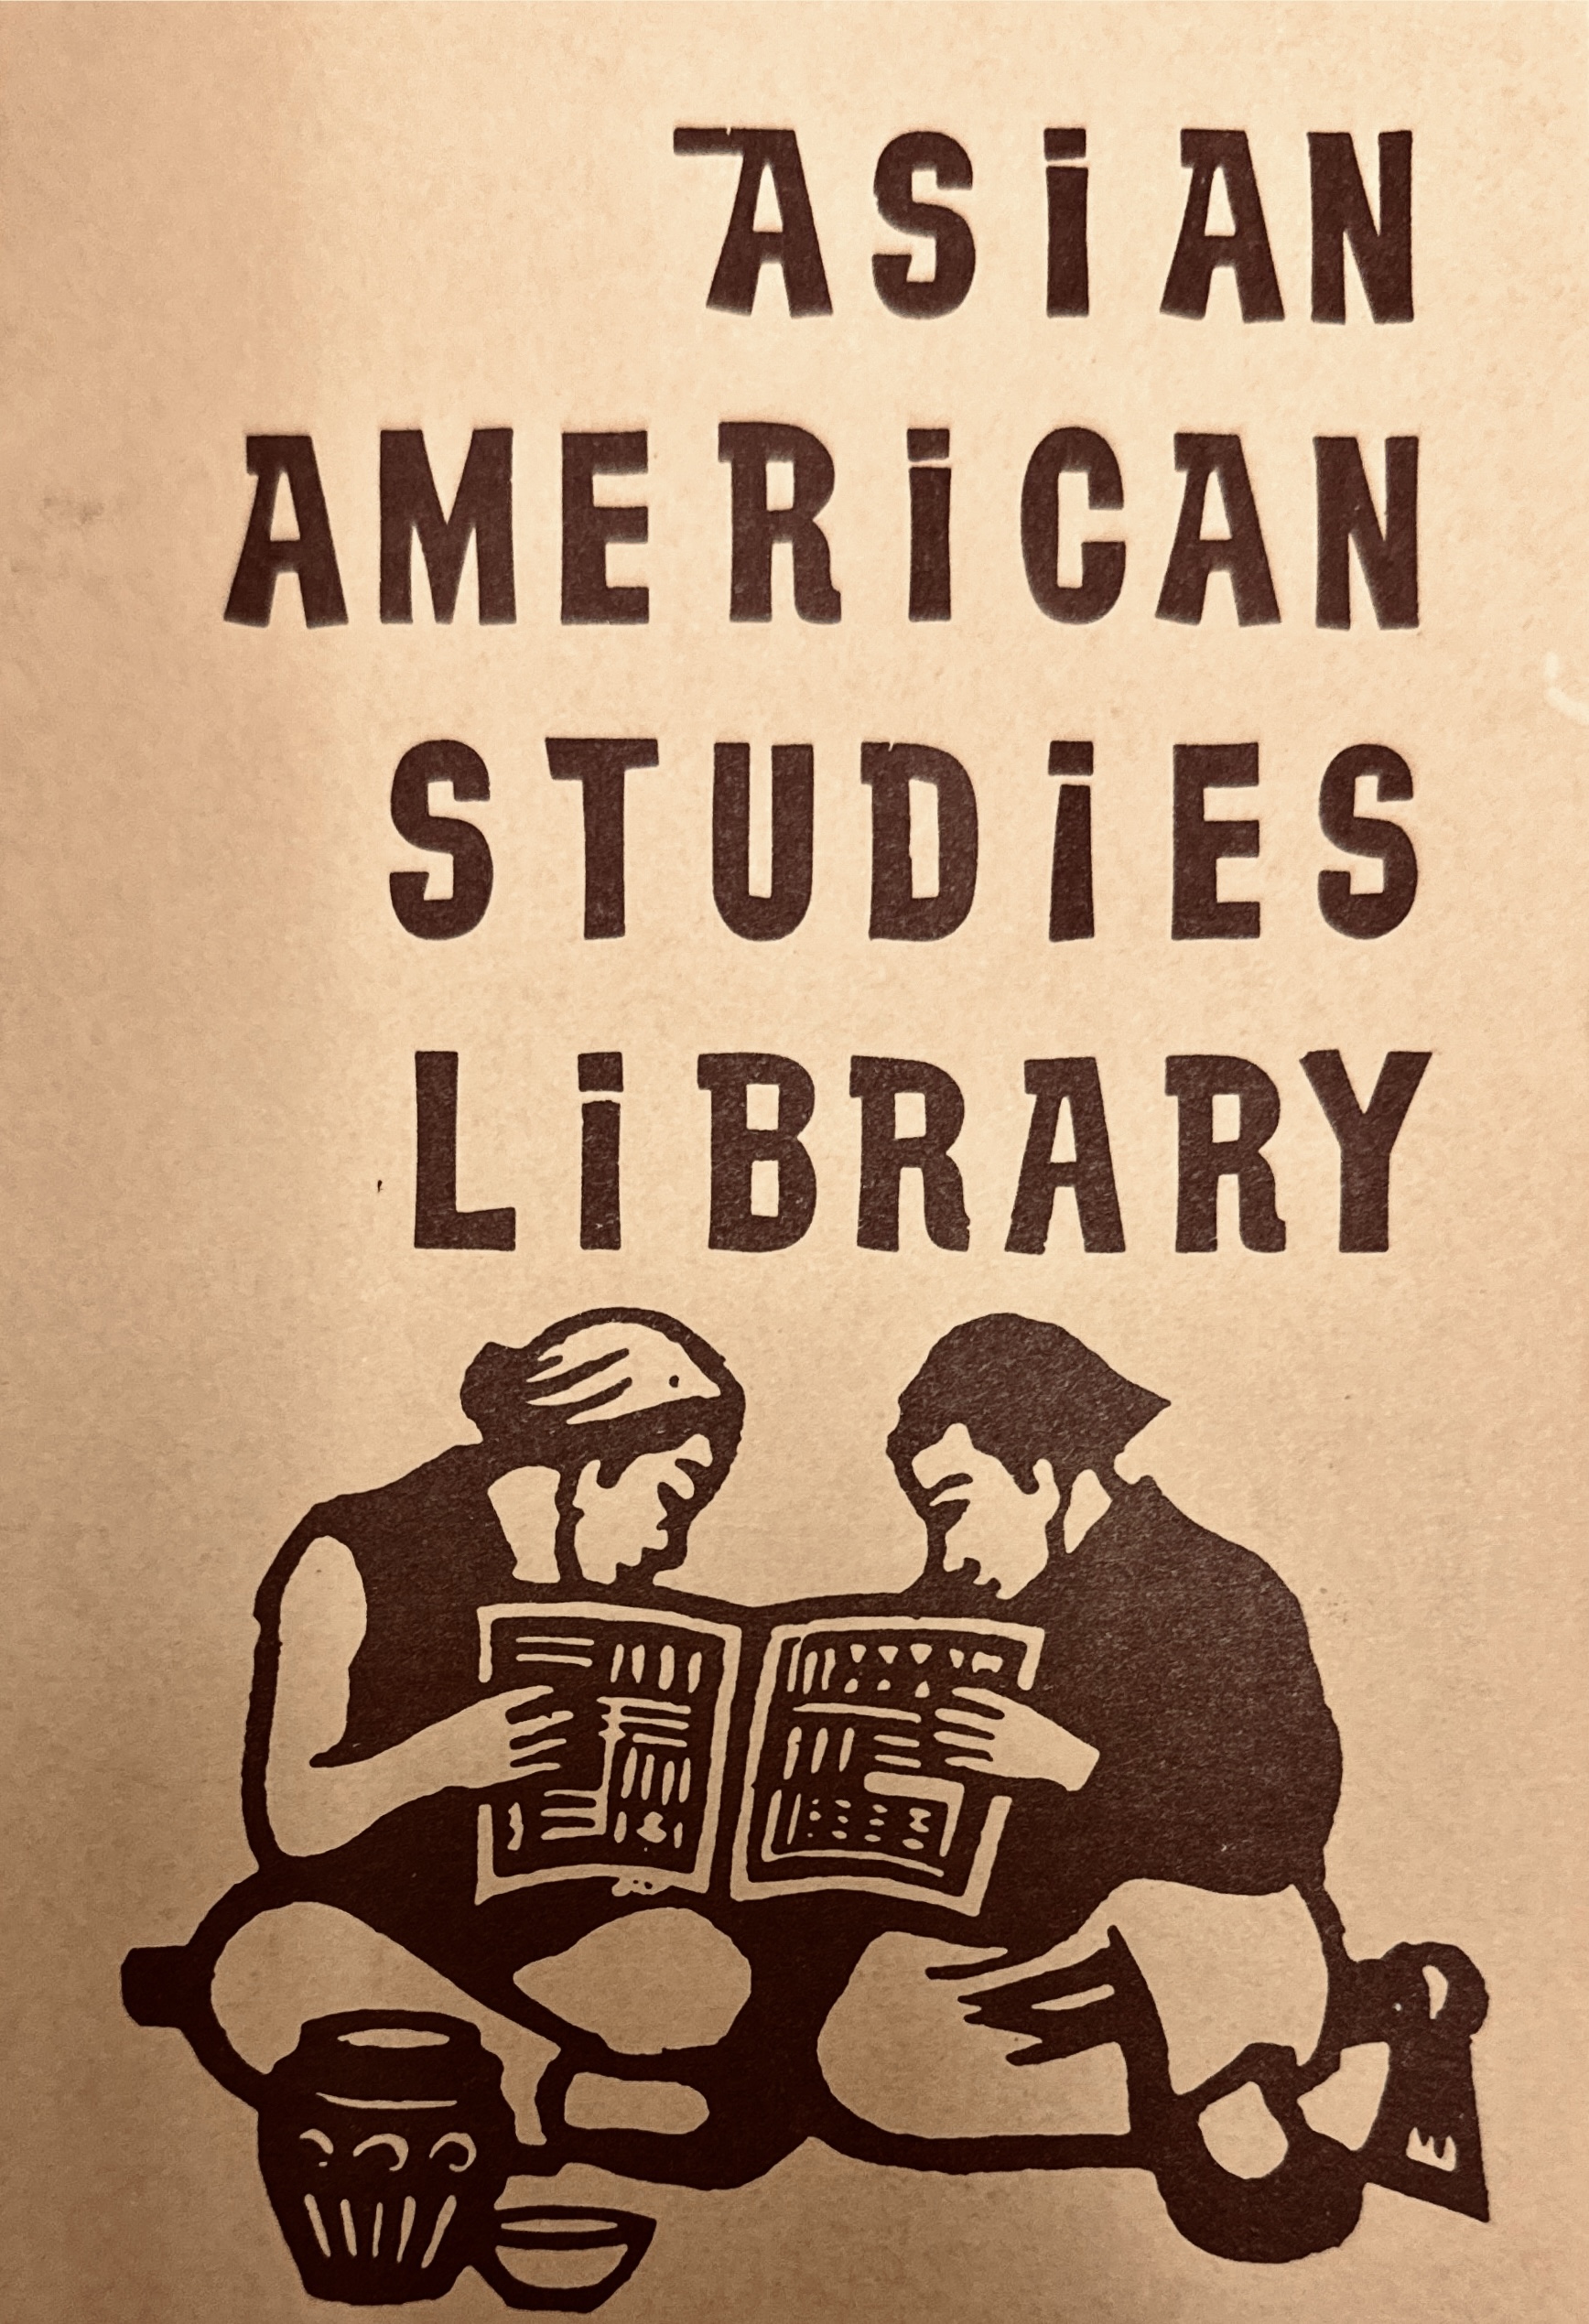 Asian American Studies Library brochure with two people reading a book next to a ceramic jar.